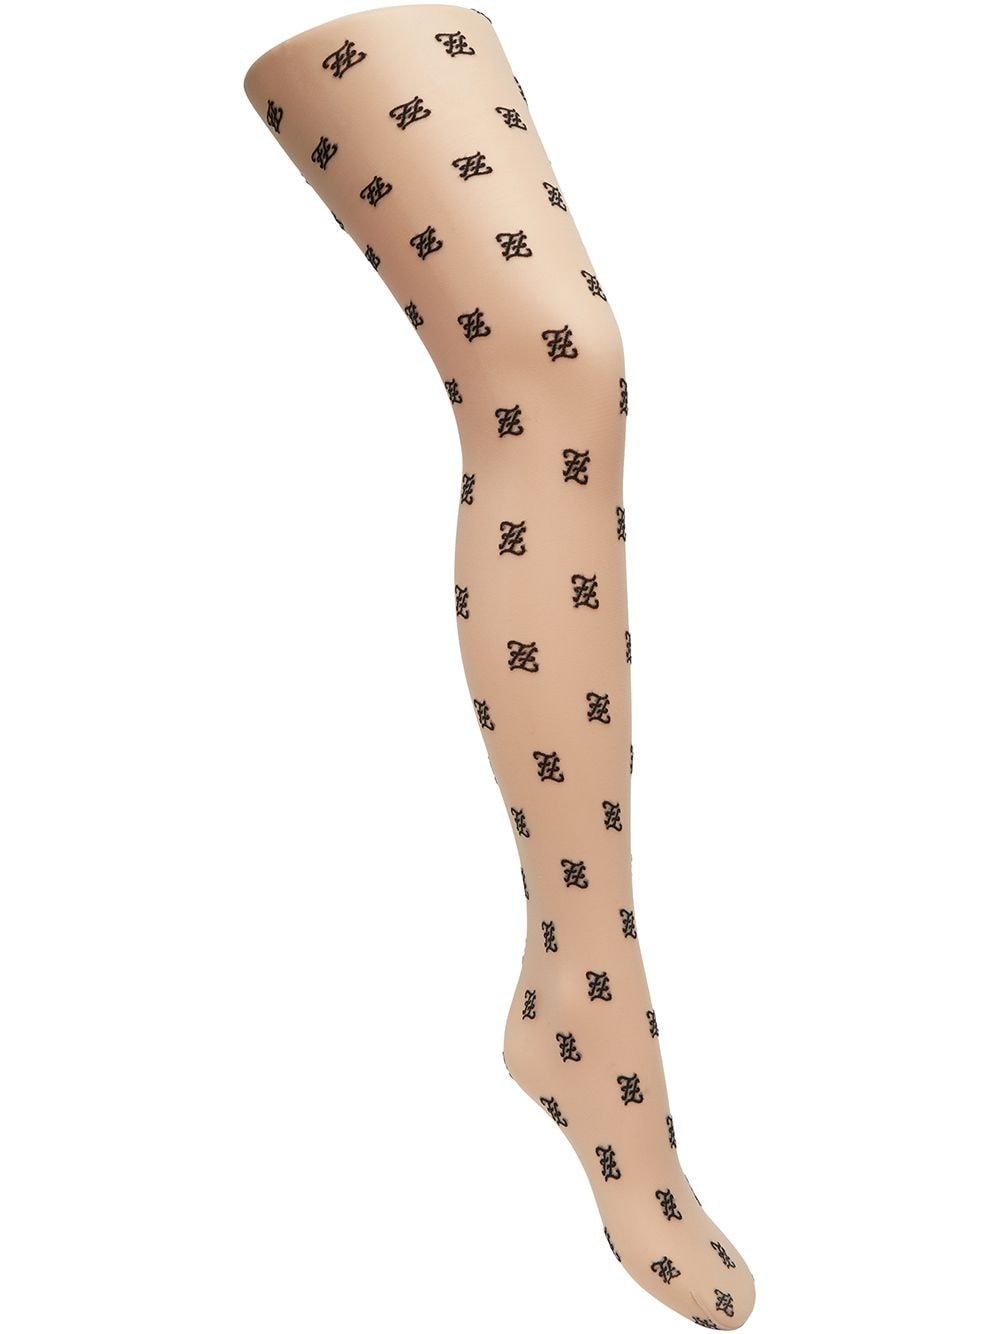 Fendi Karligraphy Motif Tights in Natural | Lyst